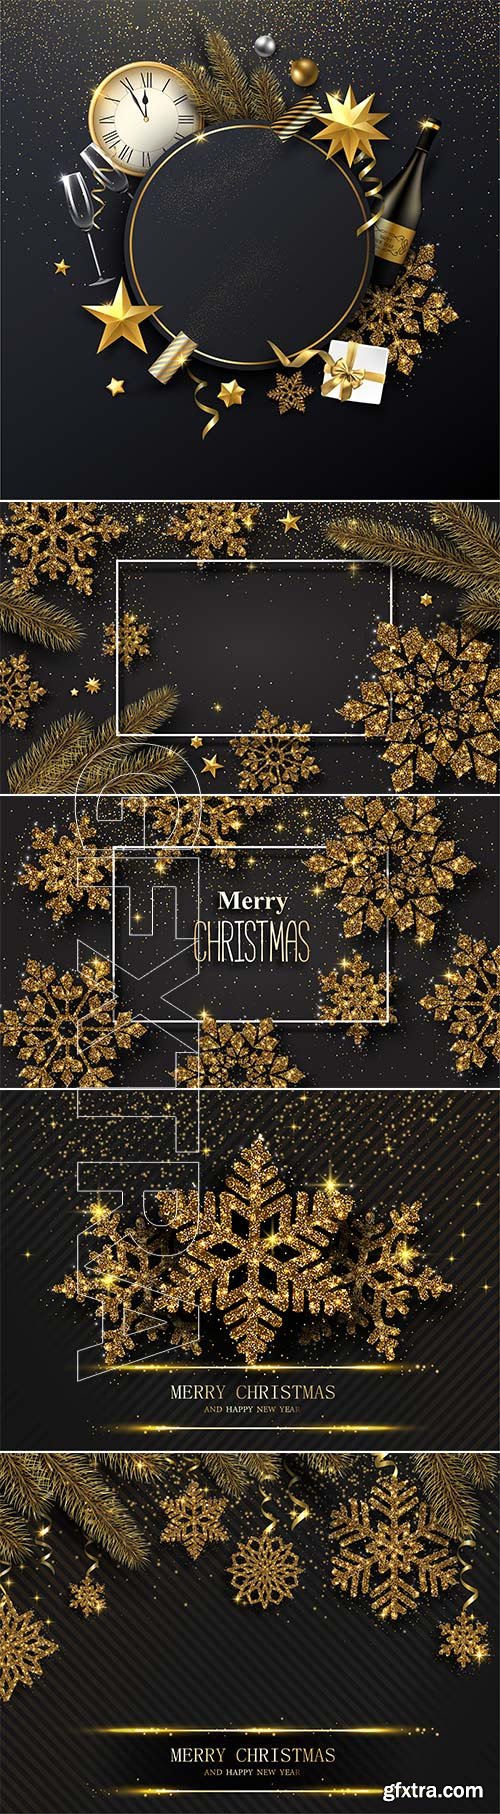 Christmas vector background with golden snowflakes, clock and champagne